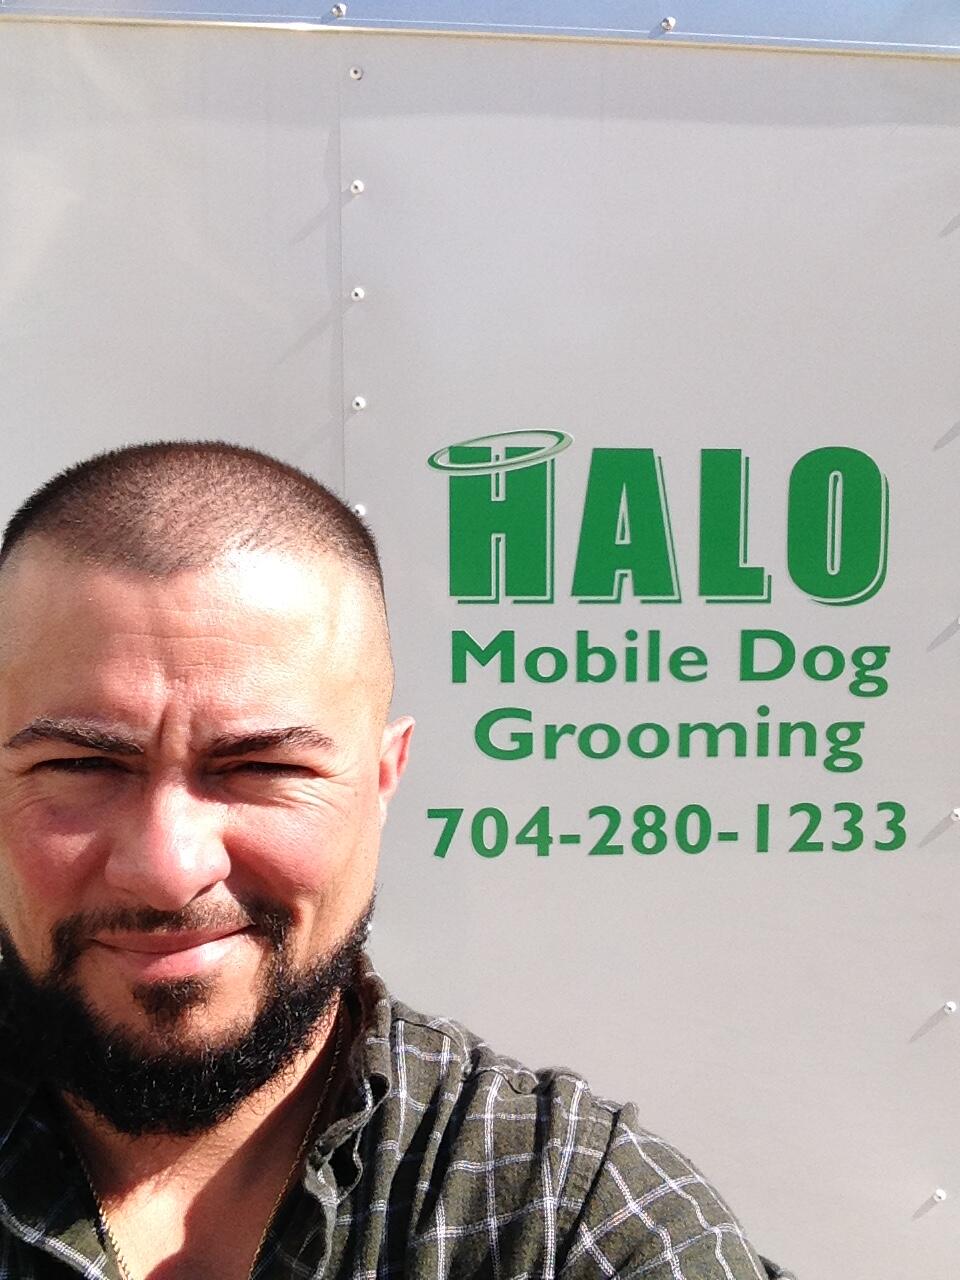 Great Mobile Dog Grooming Charlotte Nc in the year 2023 Learn more here 